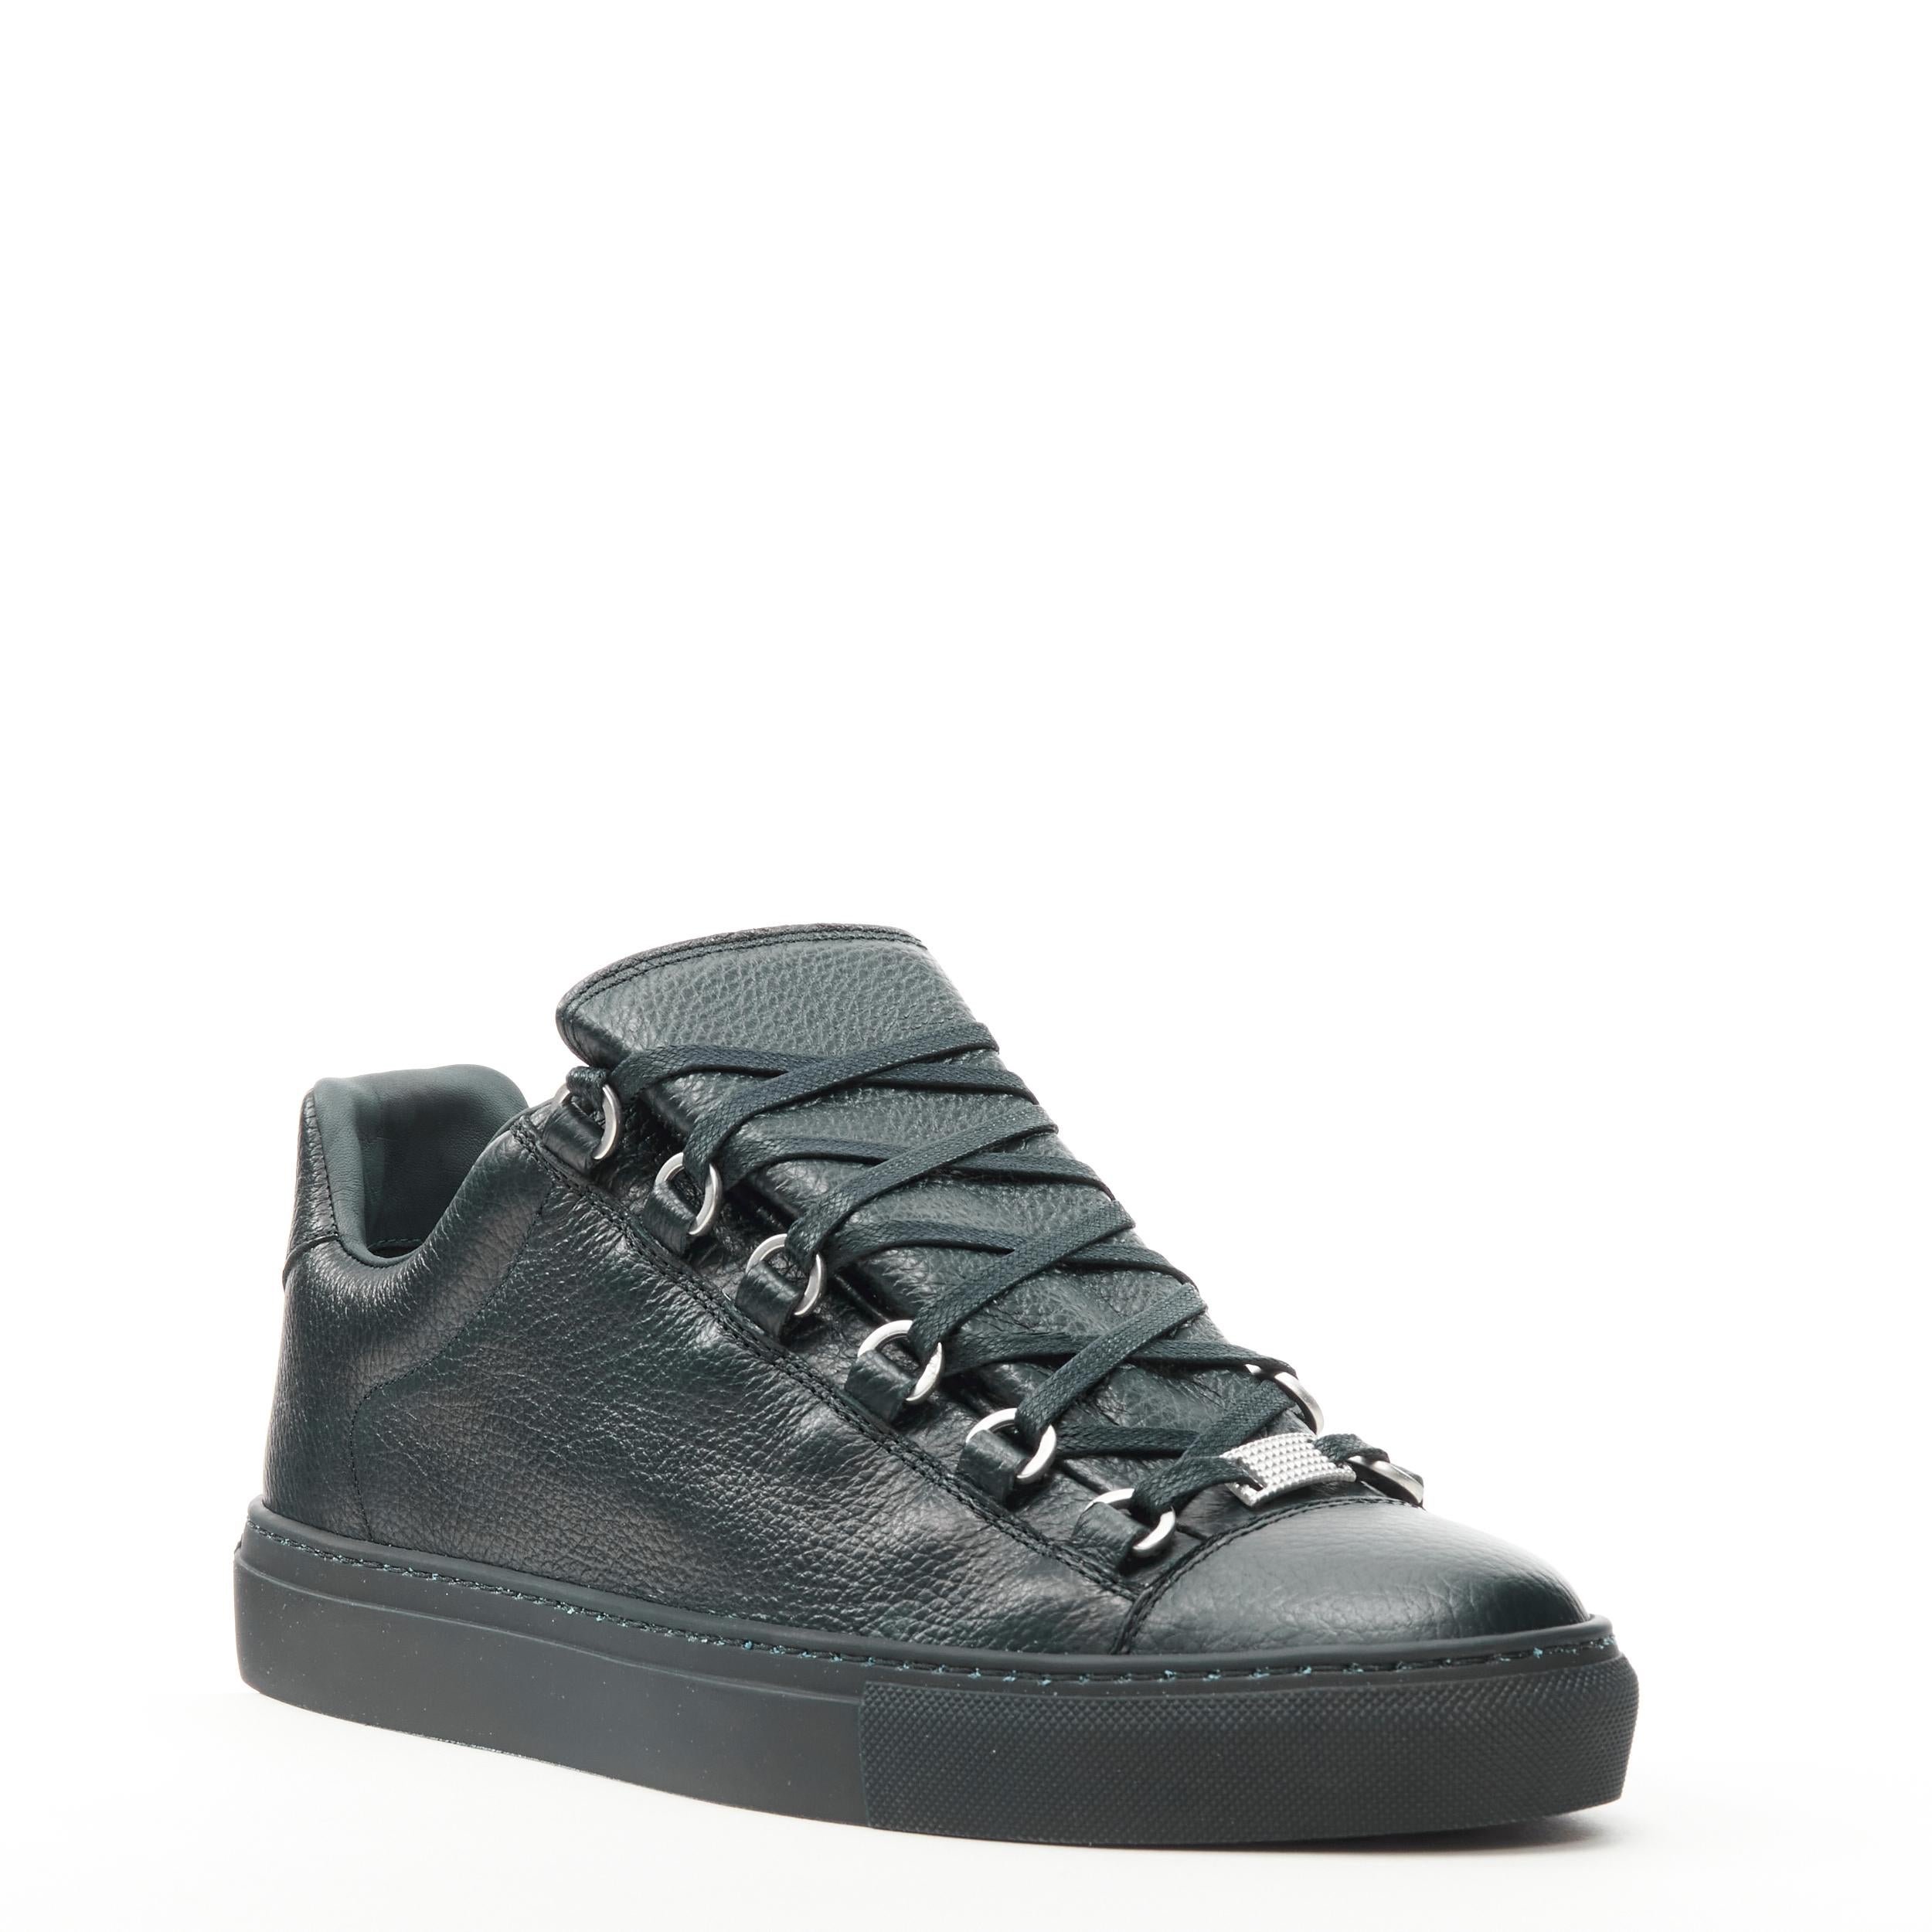 new BALENCIAGA DEMNA Arena black noir grained leather low top sneakers EU41 US8 
Reference: TGAS/C00452 
Brand: Balenciaga 
Designer: Demna 
Model: 565558 WA2NO 1000 
Material: Leather 
Color: Black 
Pattern: Solid 
Closure: Lace 
Extra Detail: